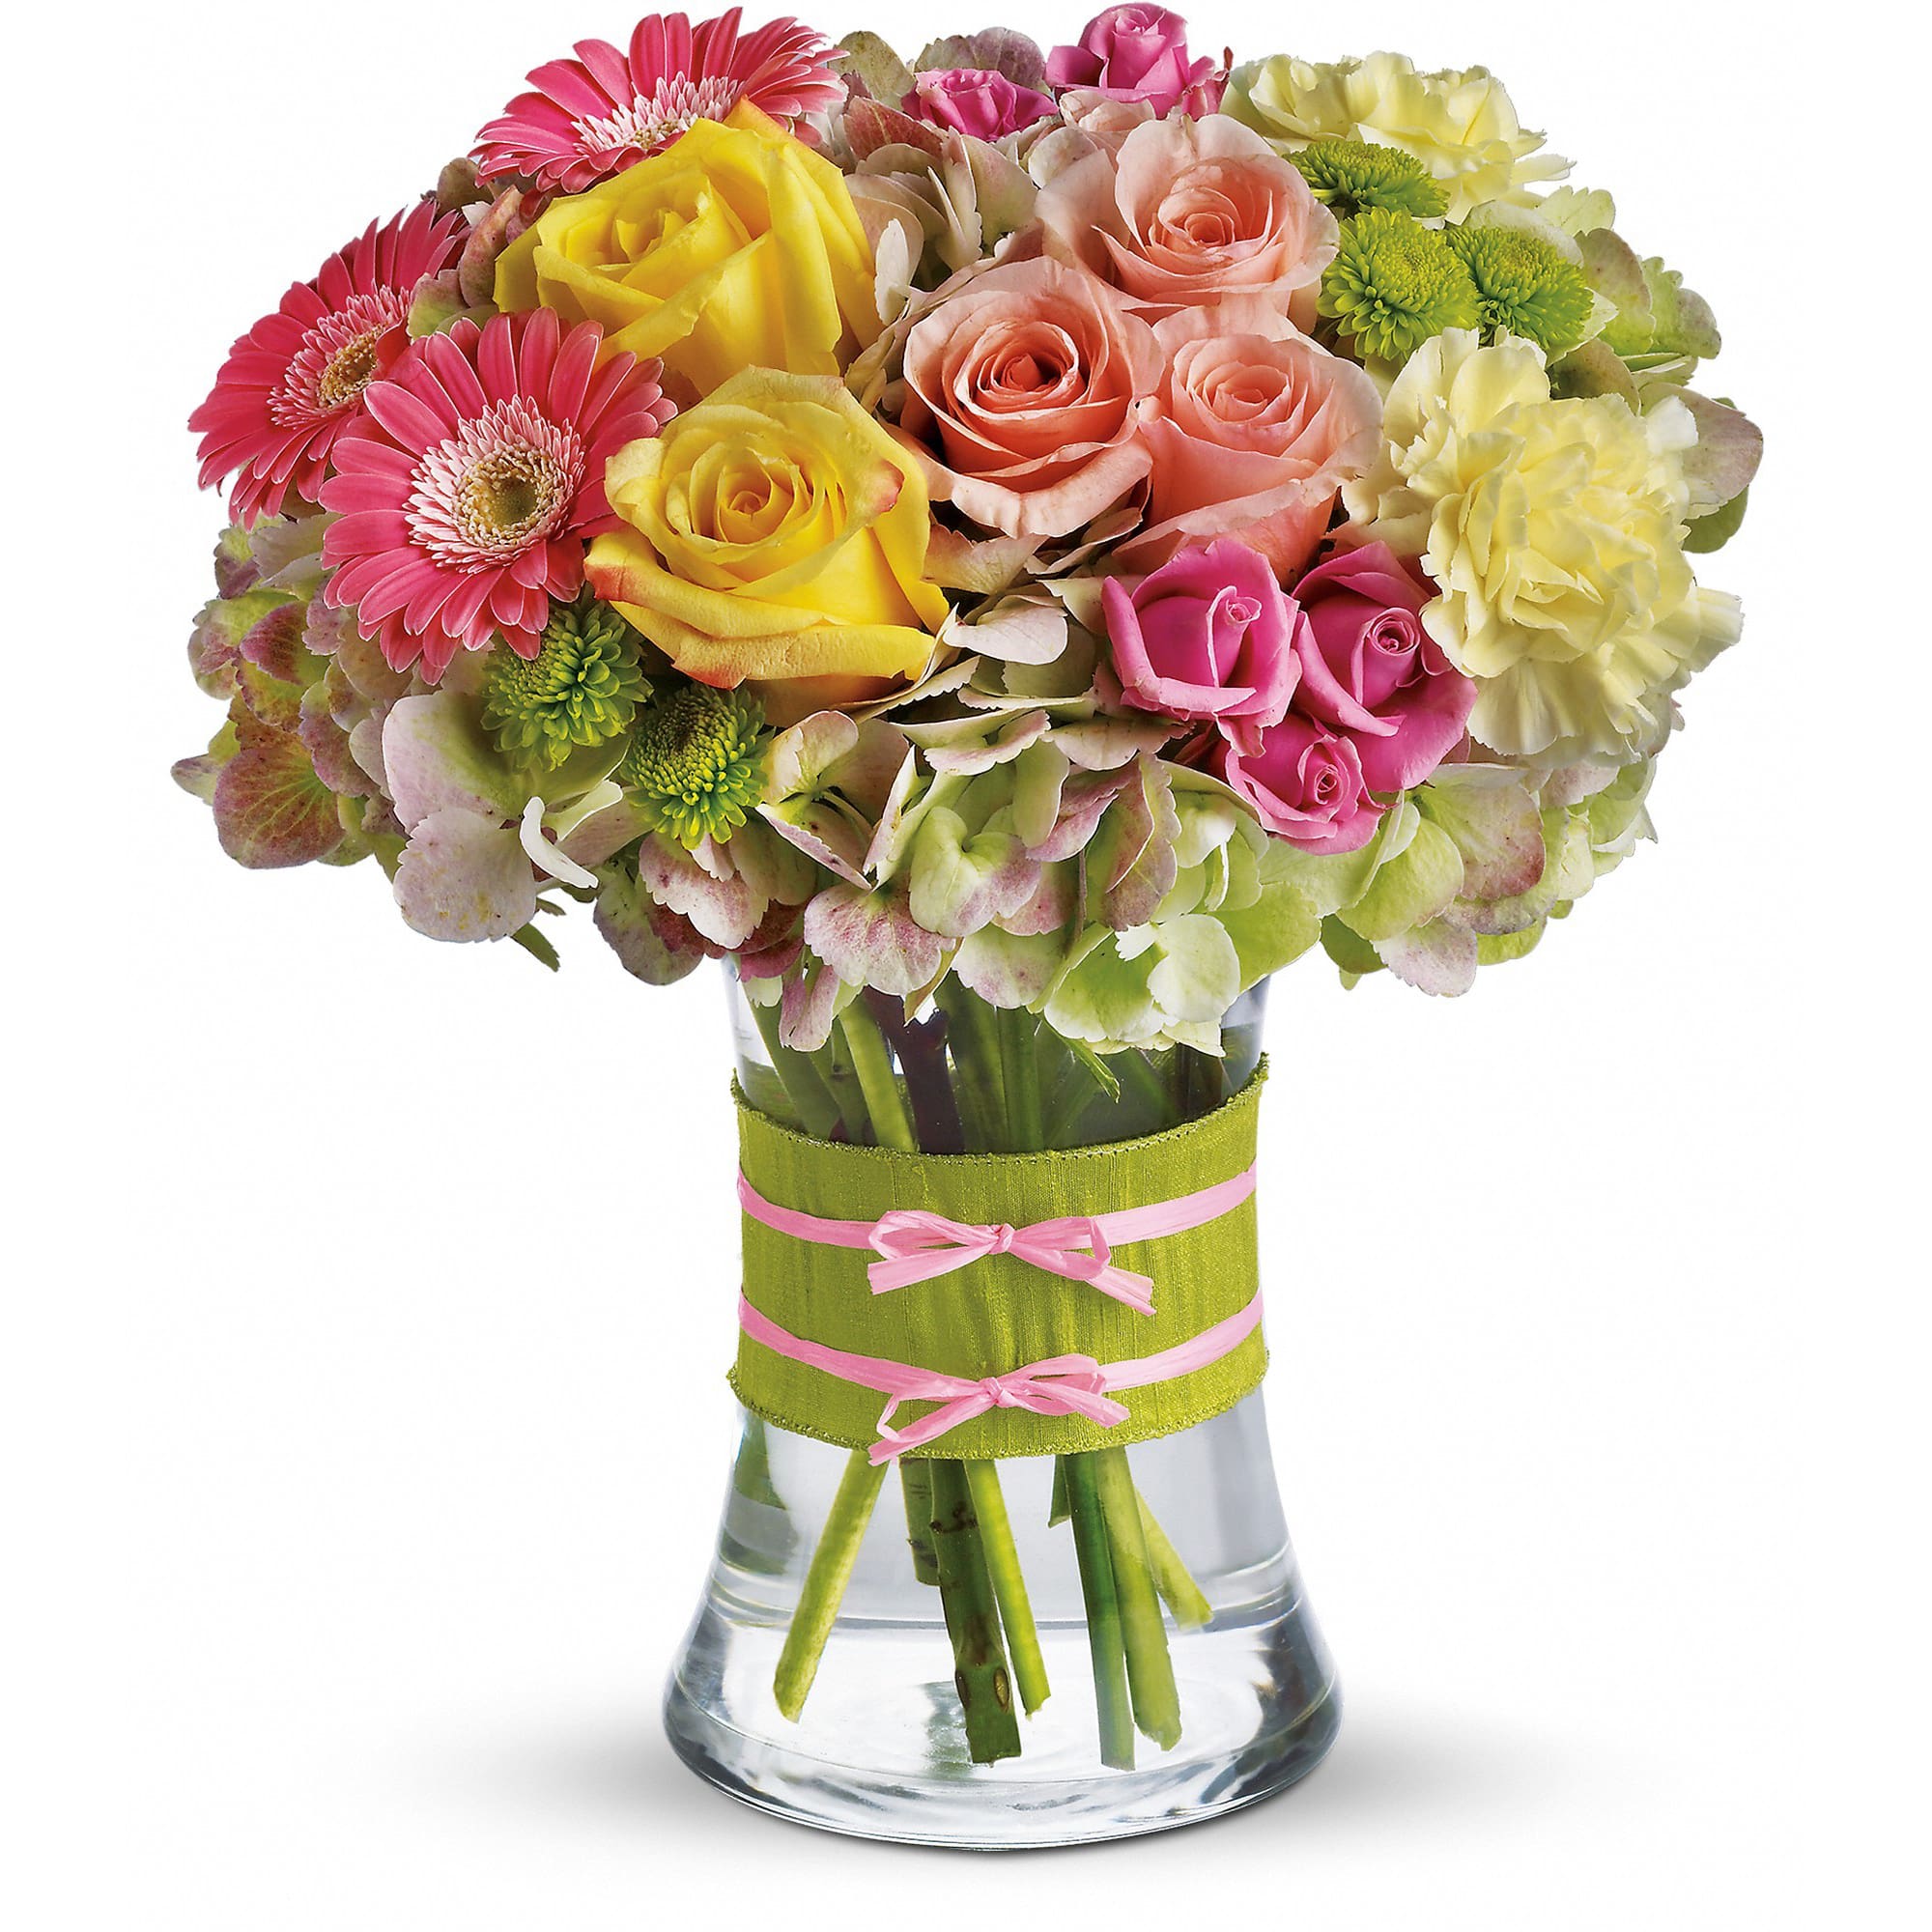 T1551ABN - Fashionista Blooms - This arrangement would be perfect for any girl with an eye for style. It's a must-have for fashionistas everywhere.  Gorgeous green hydrangea, yellow and light pink roses, pink spray roses and mini gerberas, light yellow carnations and green button spray chrysanthemums are delivered in a pretty gathering vase. Not just any vase, of course, this one's accessorized with a chartreuse taffeta ribbon and pink raffia. T1551ABN